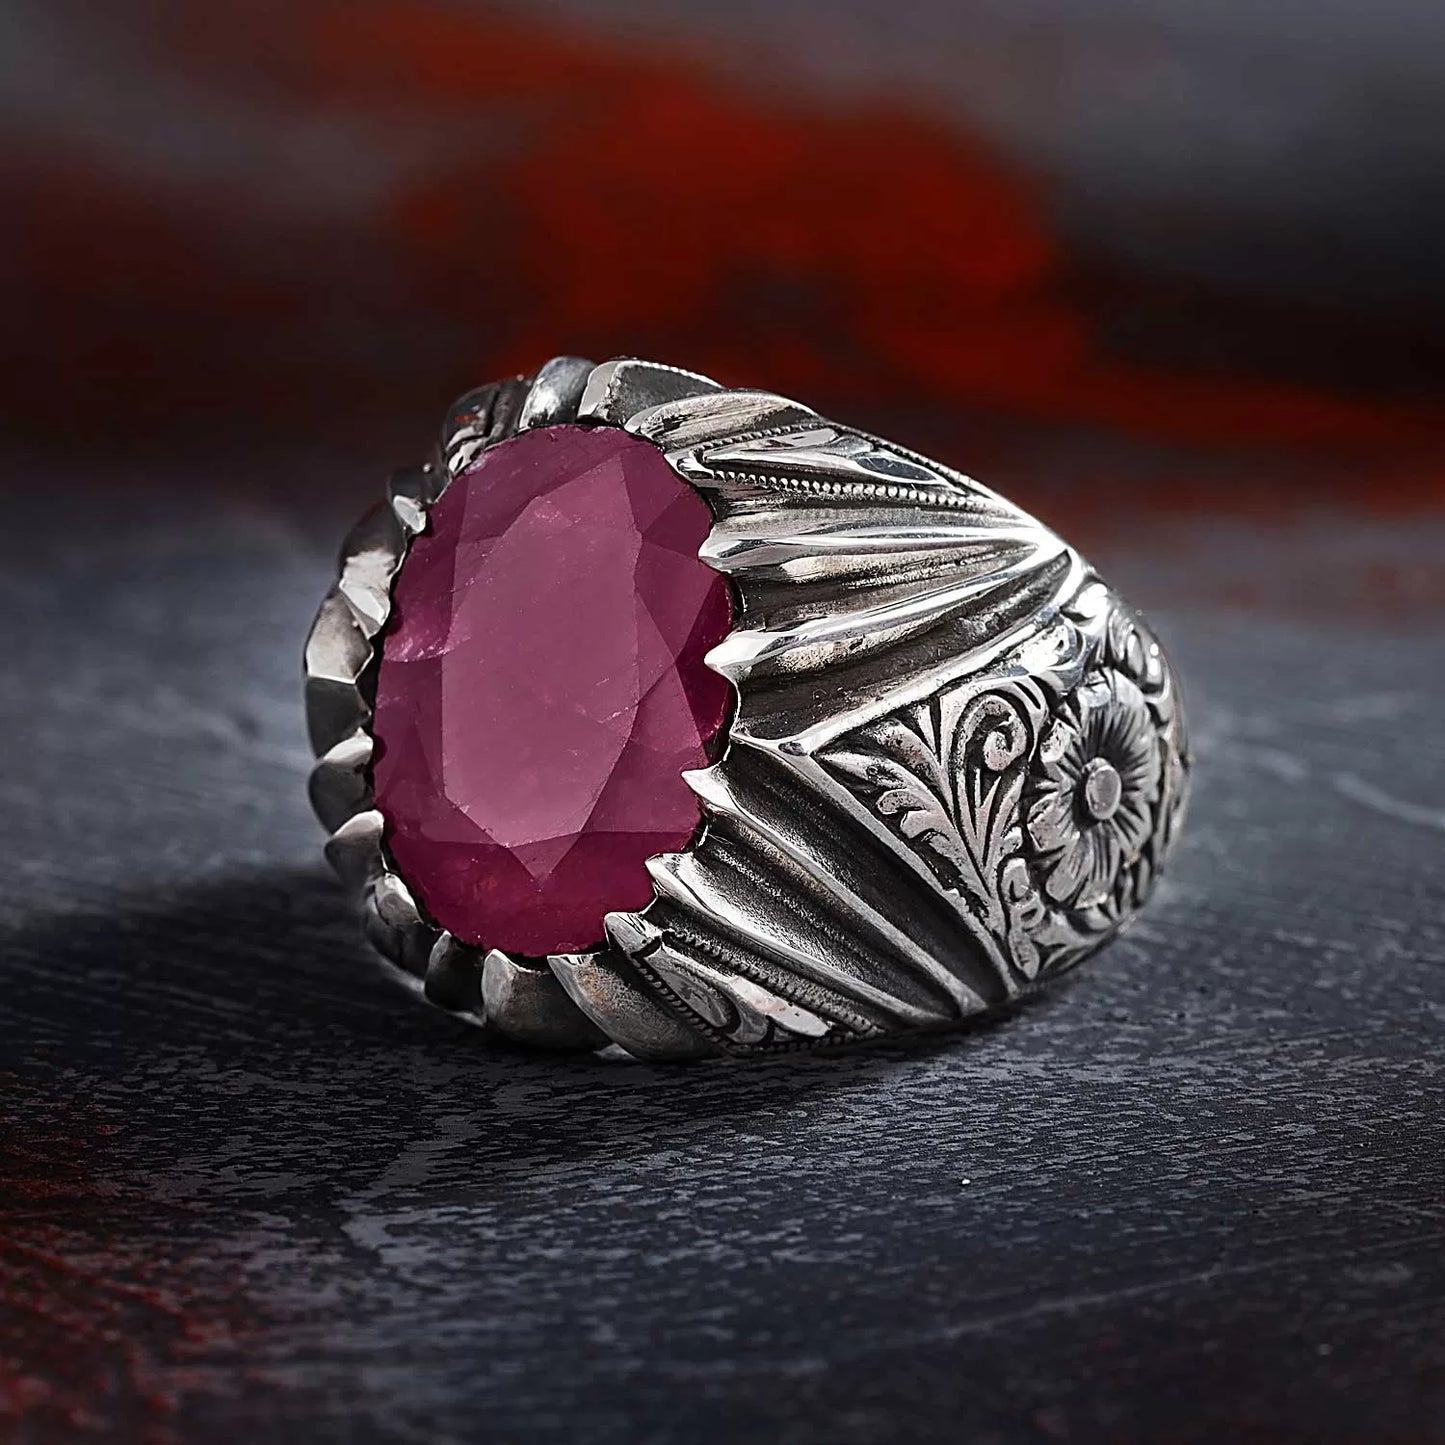 RARE PRINCE by CARAT SUTRA | Unique Designed Ring with Natural Red Ruby | 925 Sterling Silver Oxidized Ring | Men's Jewelry | With Certificate of Authenticity and 925 Hallmark